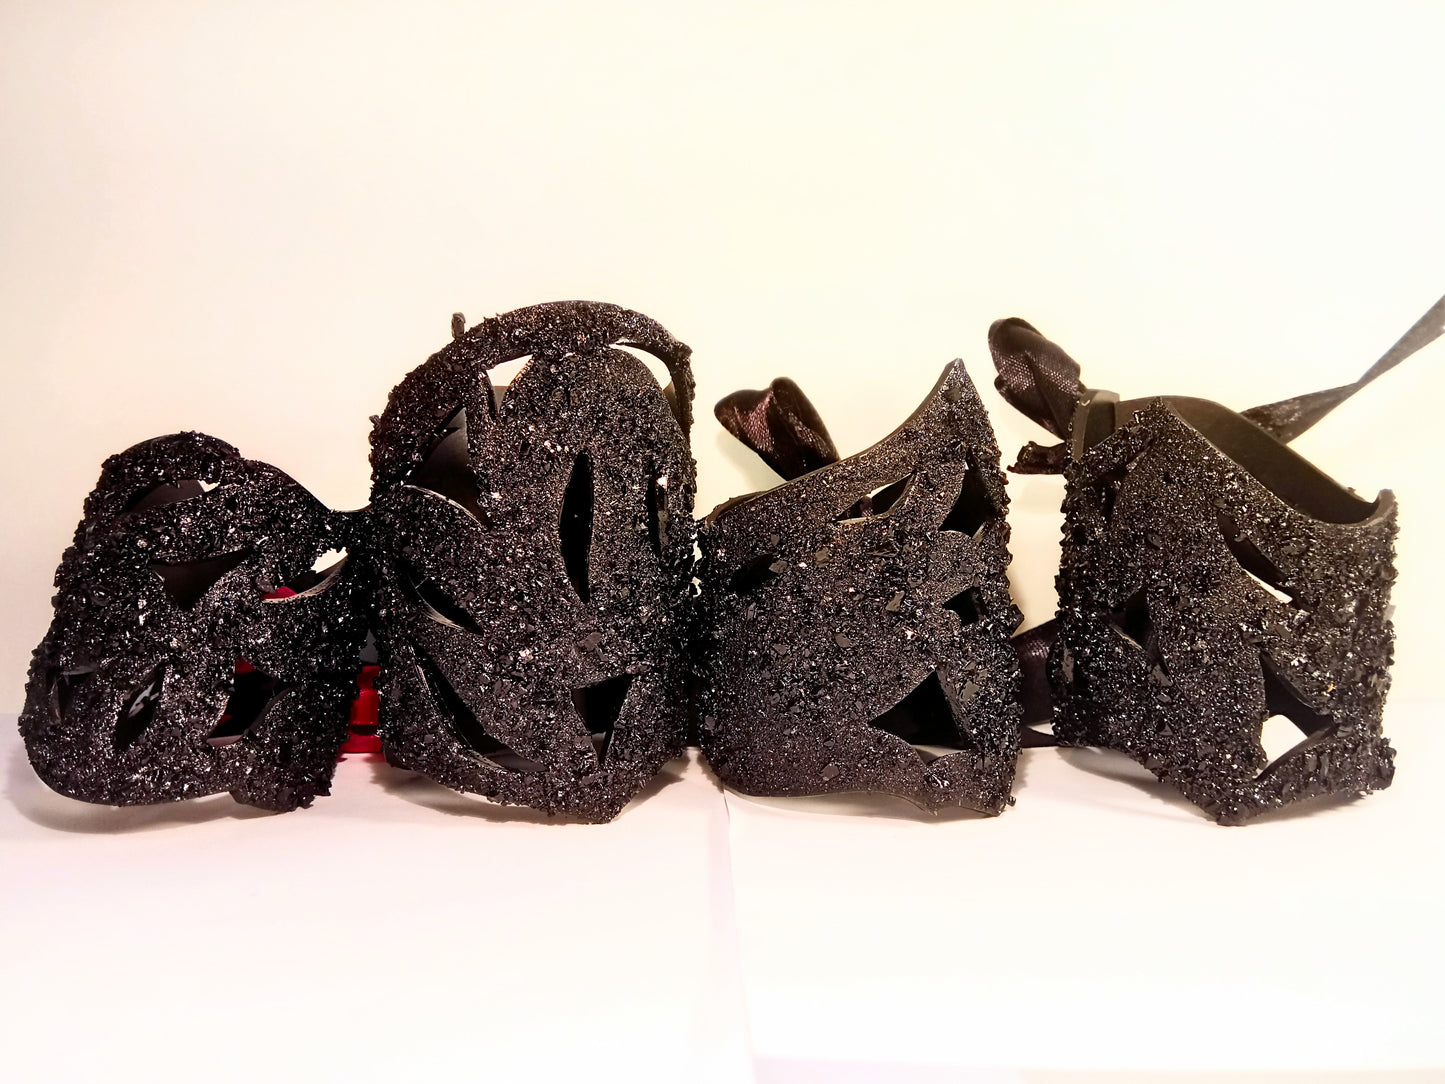 The KUOLMi Lace bracelet is made of 10 million-year-old stone. Due to its black luster and special organic shape, each piece is unique and unrepeatable in its appearance. It is made entirely by hand from coal and stainless steel. The size is adjustable. Jewelry is packaged in a gift box. The story about coal from which the bracelet was made is included as a gift.  Mighty and powerful.